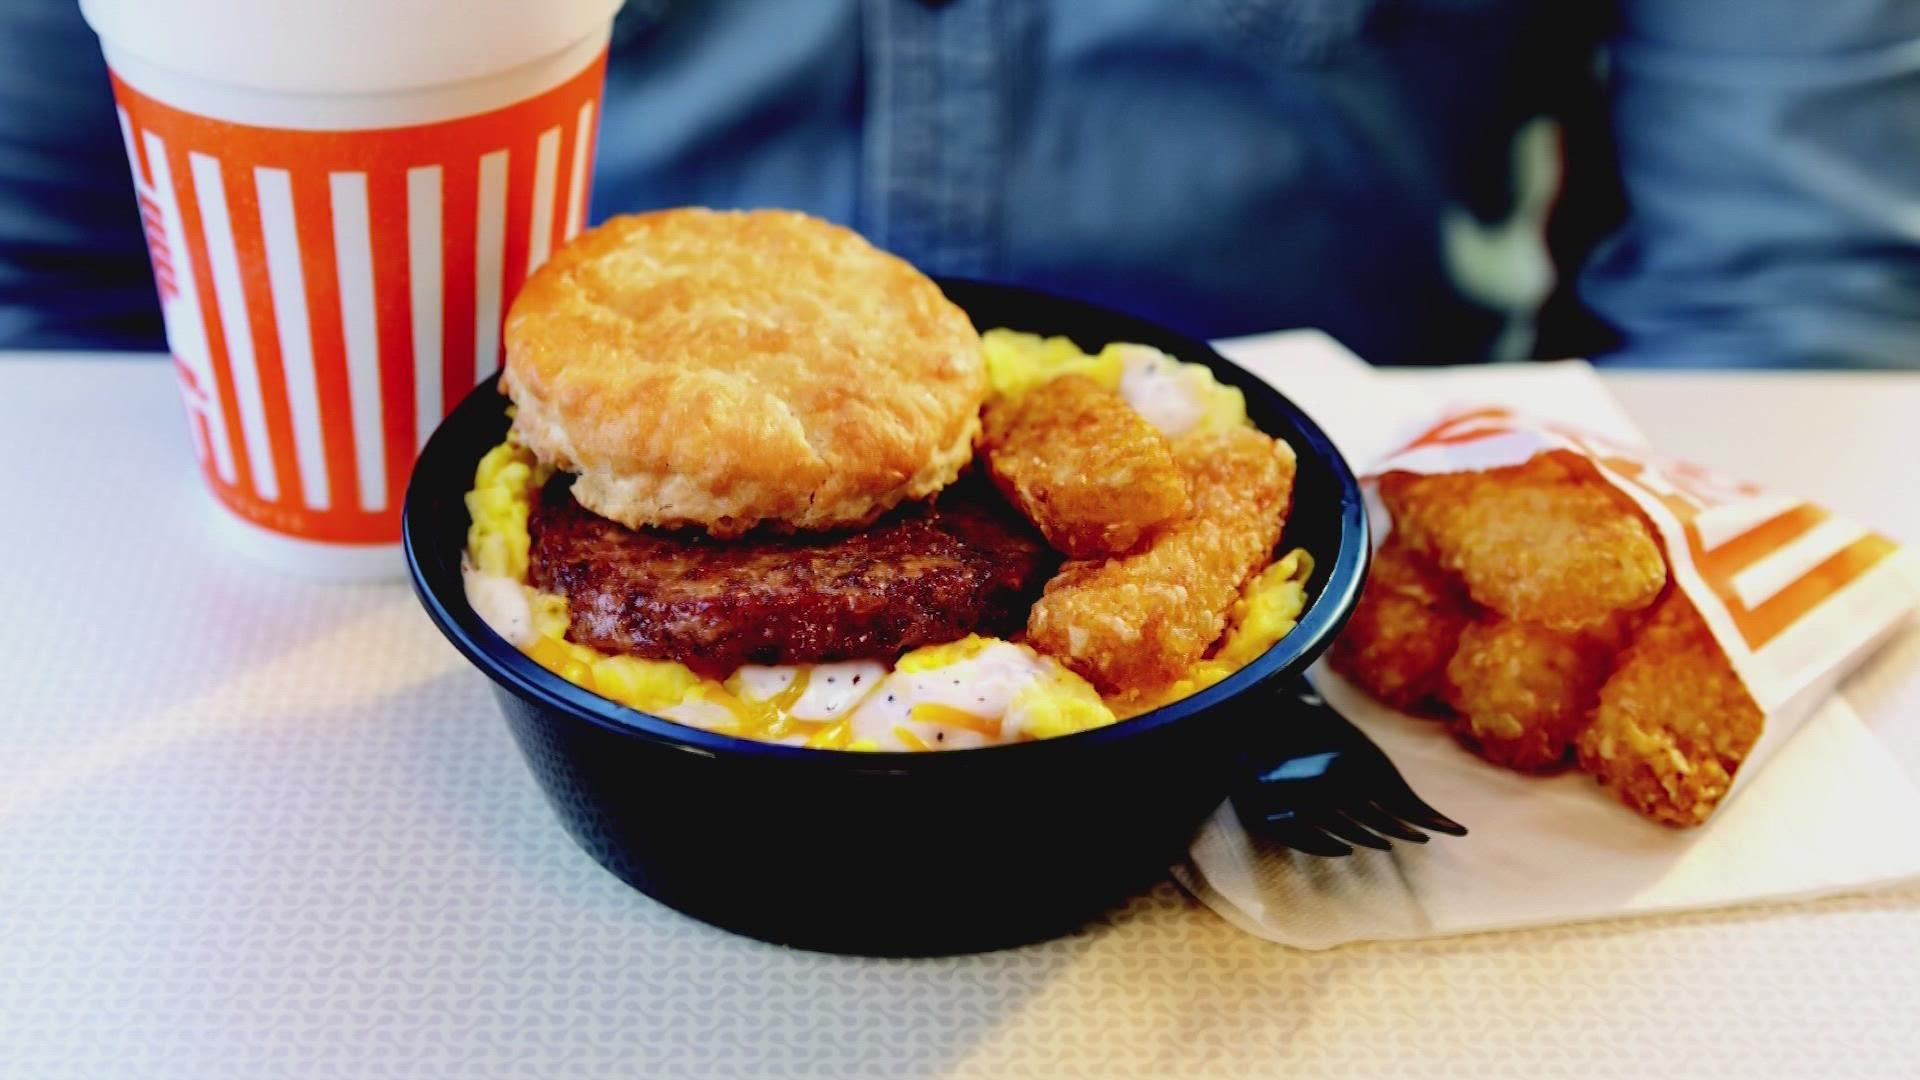 The Texas icon is rolling out a new breakfast product. But it won't be permanent.